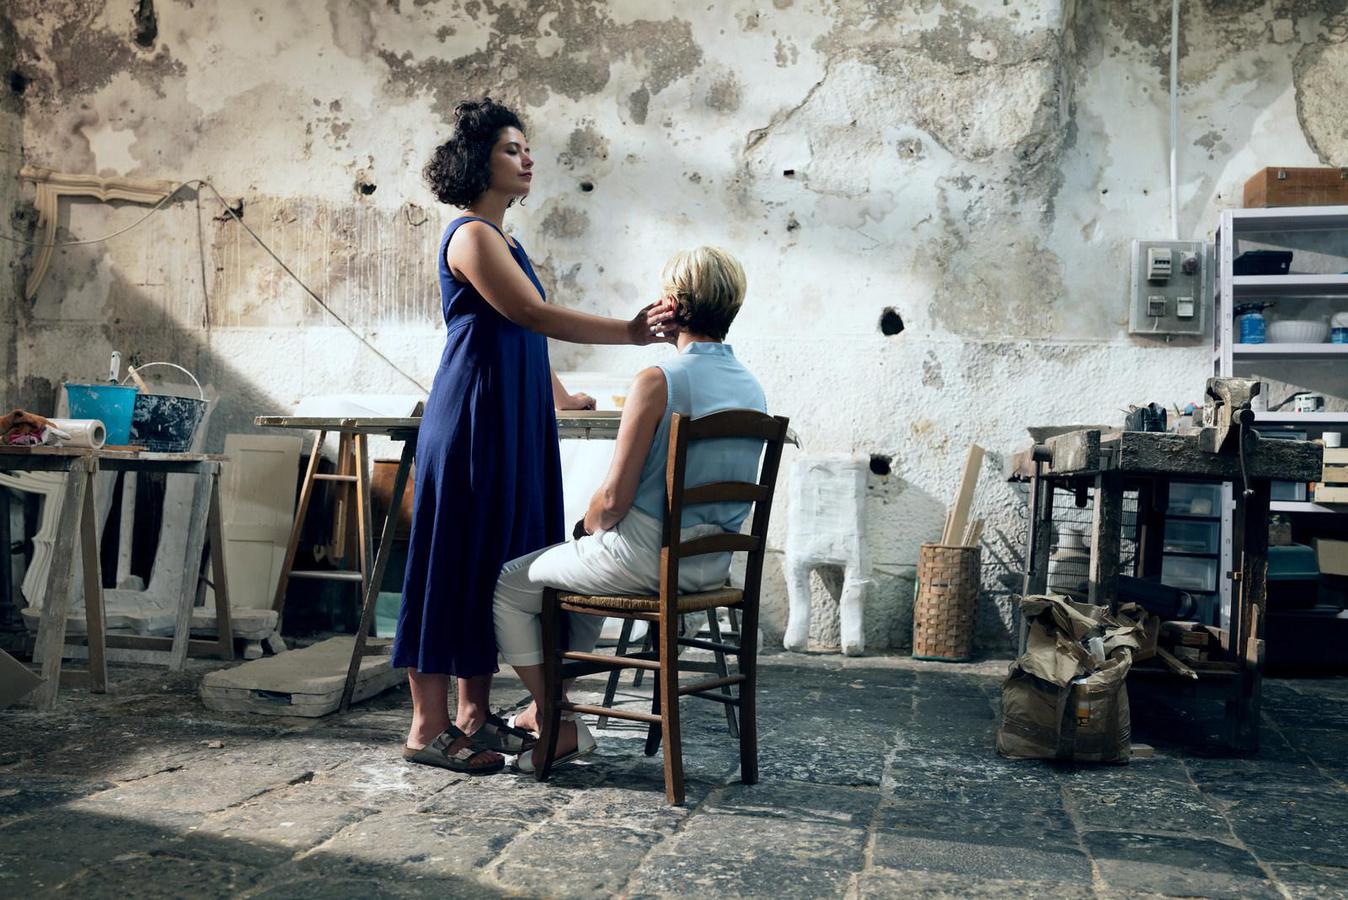 image of woman touching someones face as they sit in a chair. nivea nft